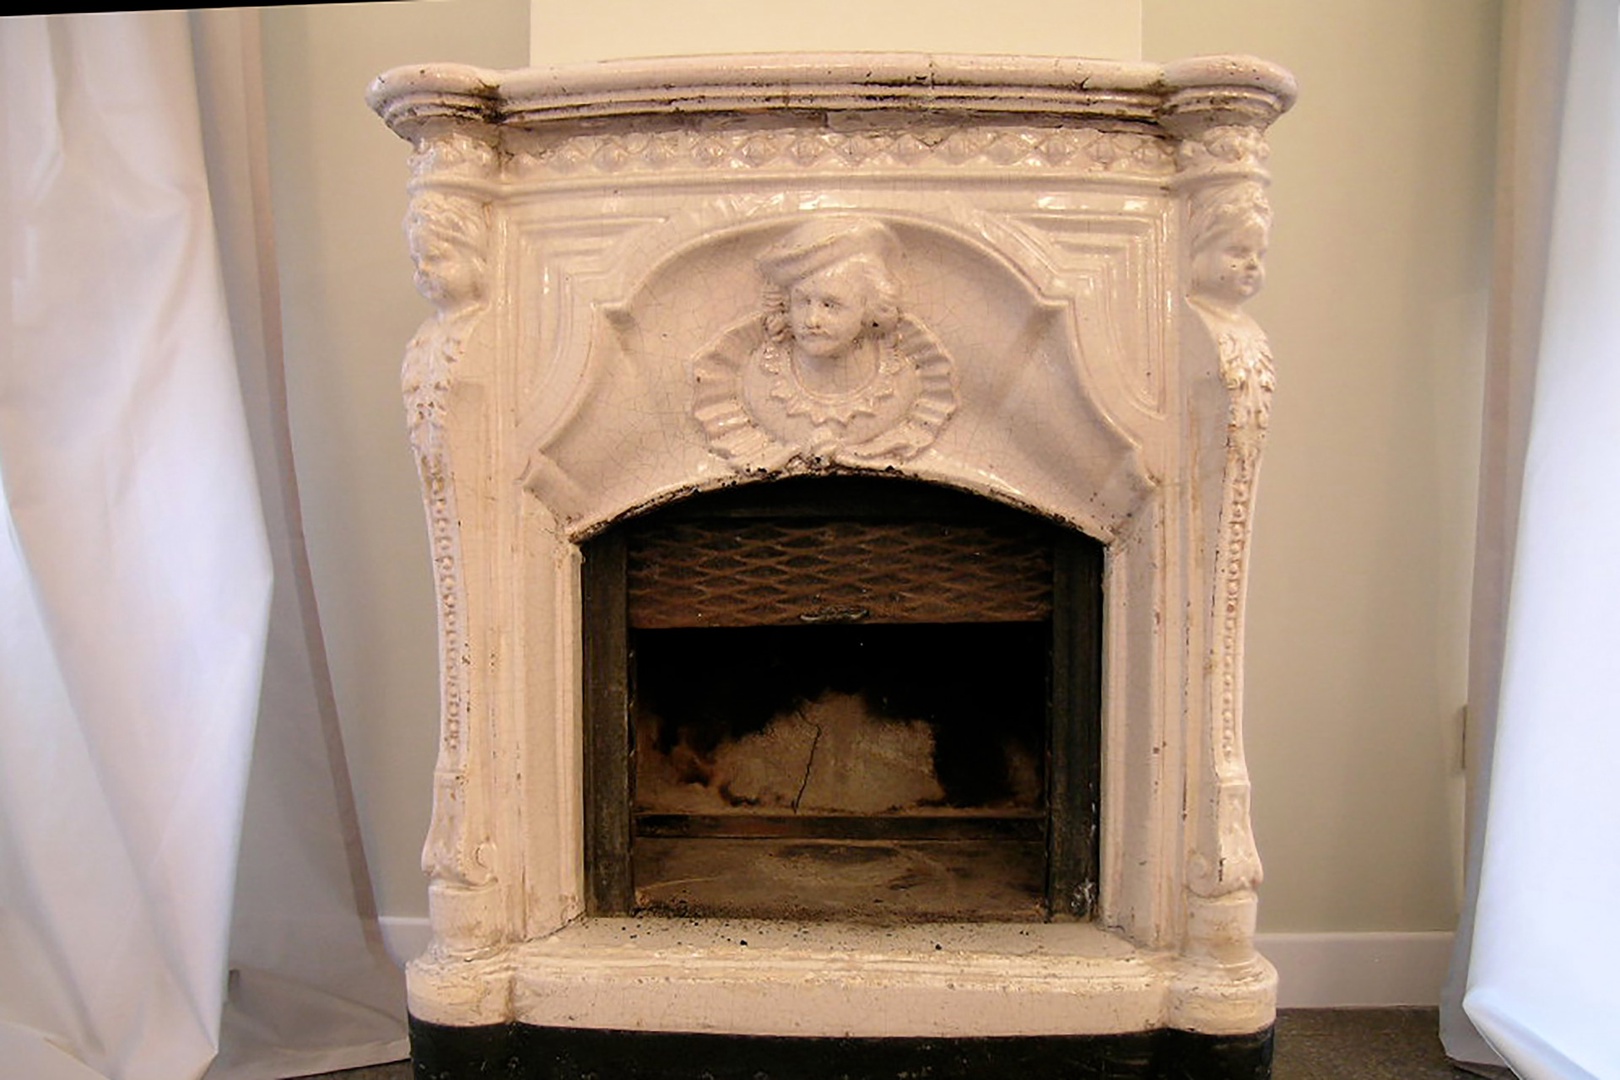 This 200 year old decorative ceramic fireplace originally heated the room.